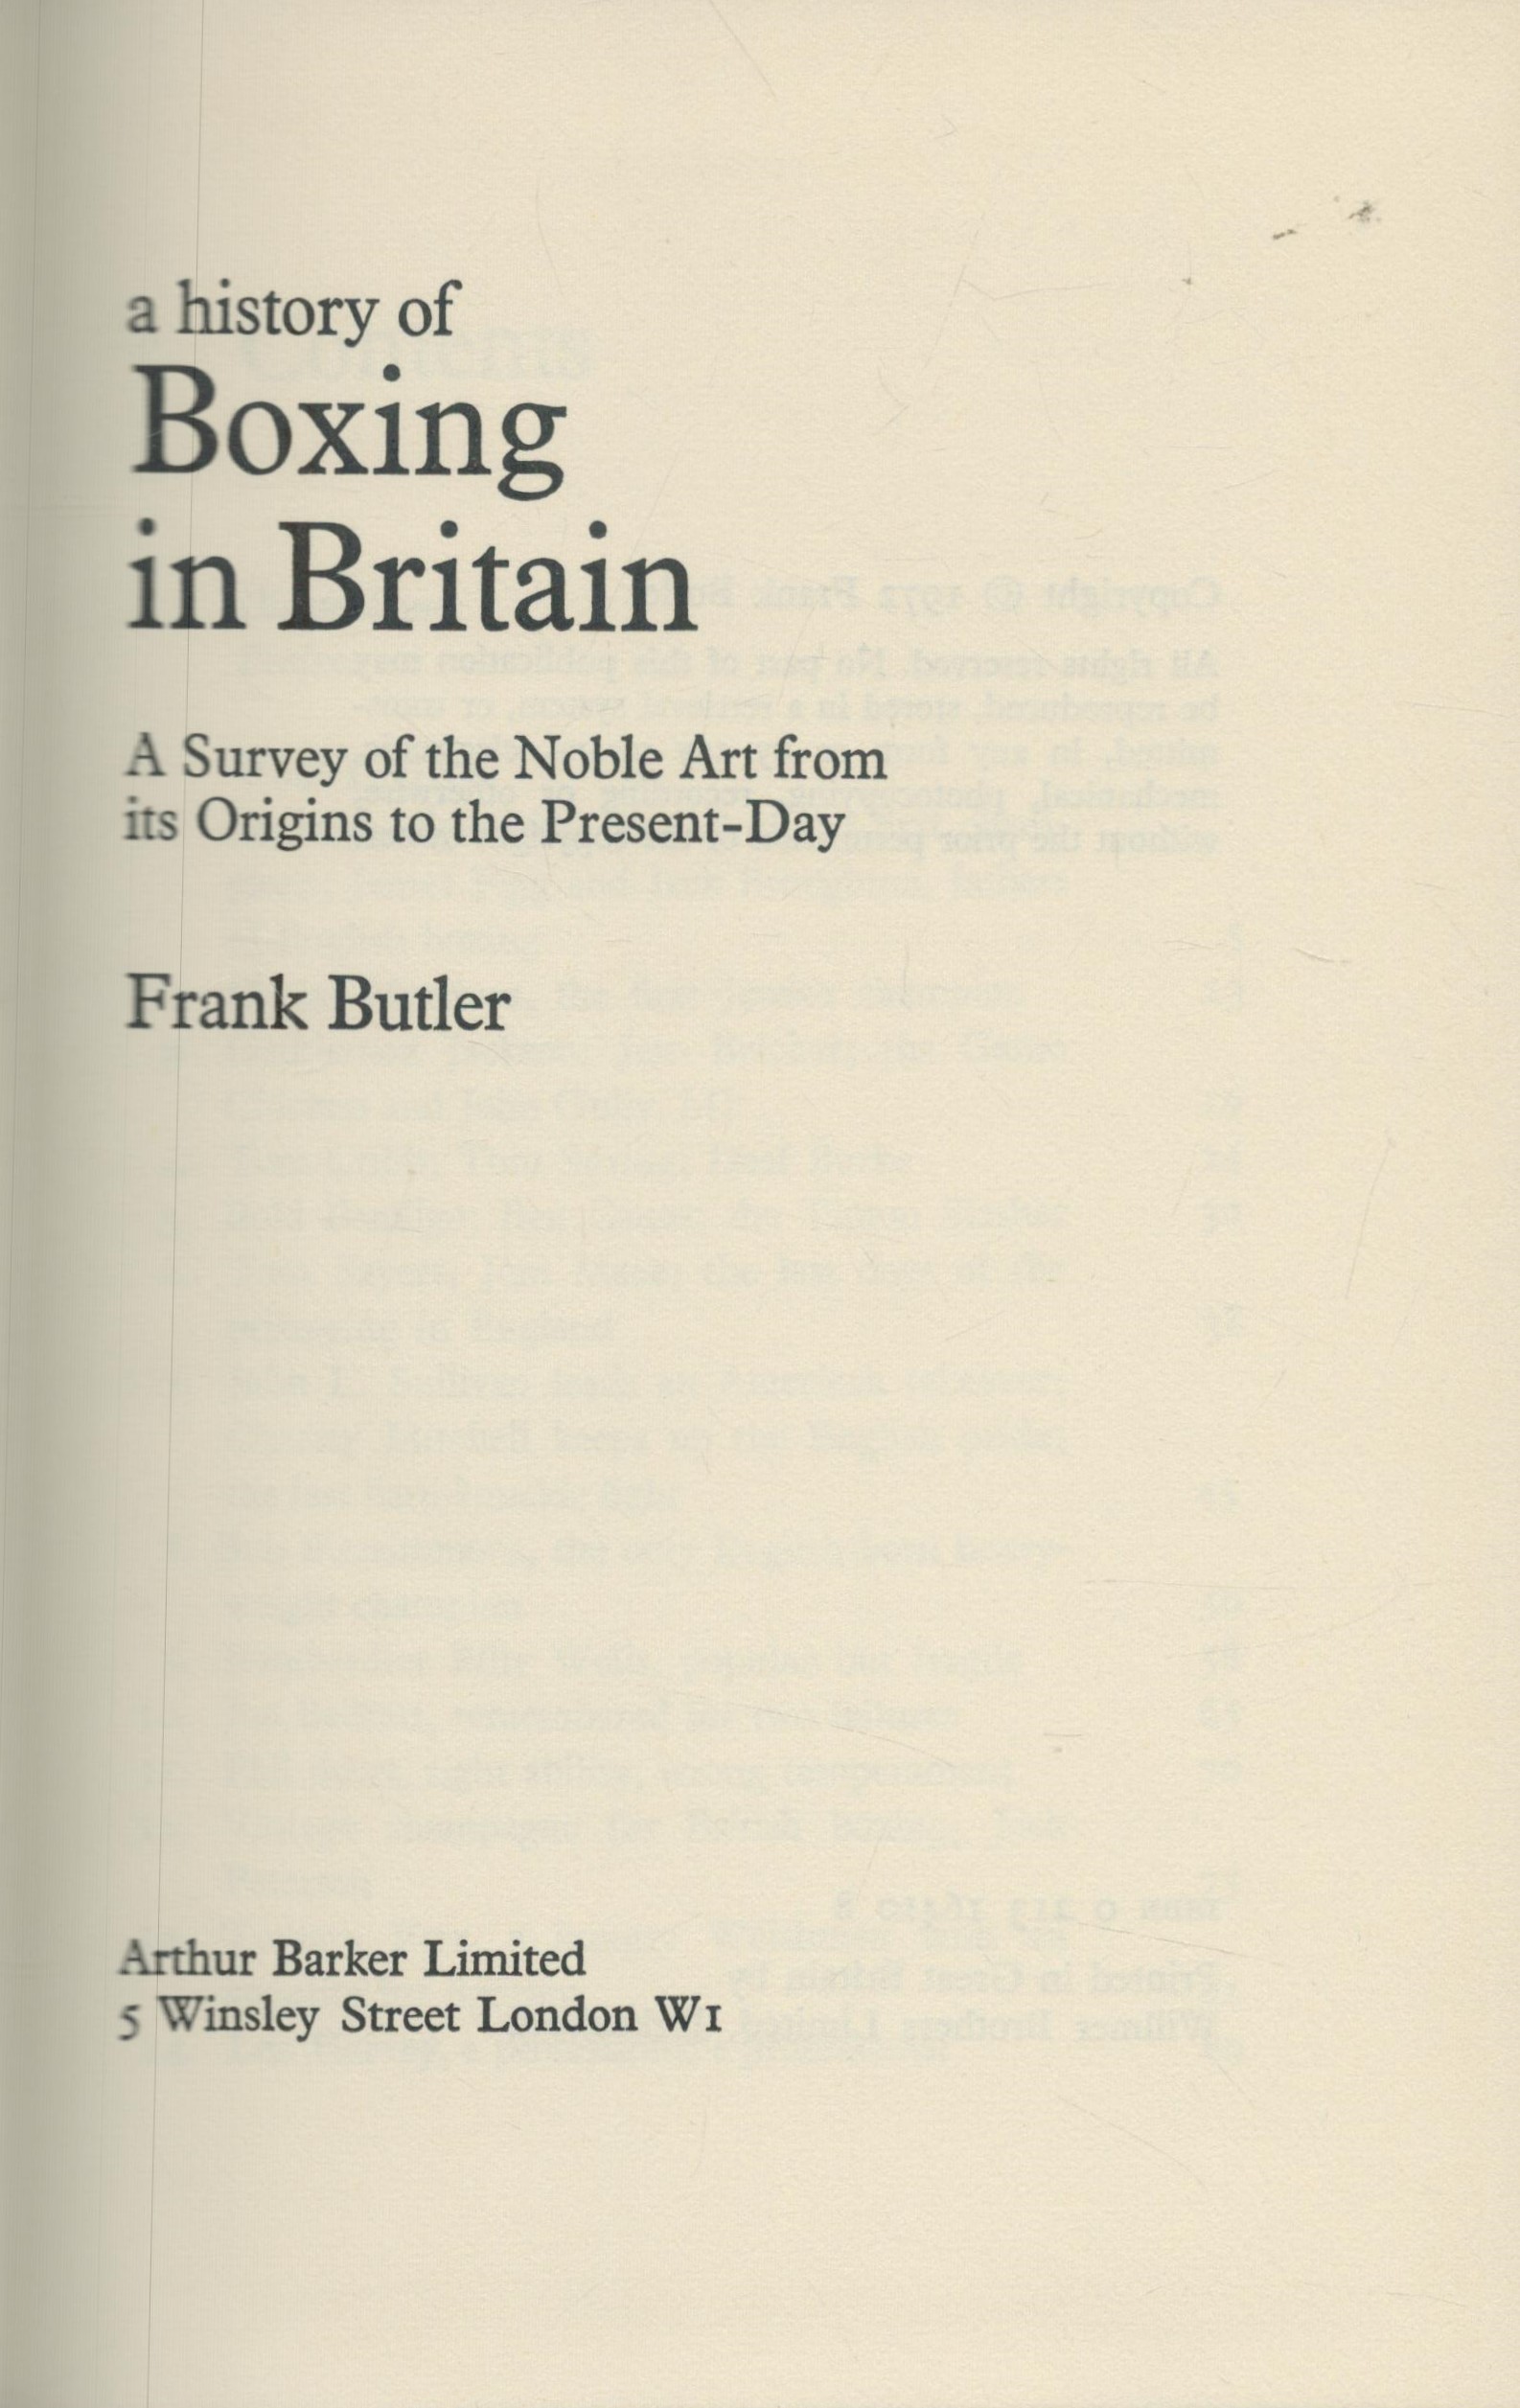 A History of Boxing in Britain Frank Butler Hardback book, 207 pages. Good Condition. All autographs - Image 2 of 3